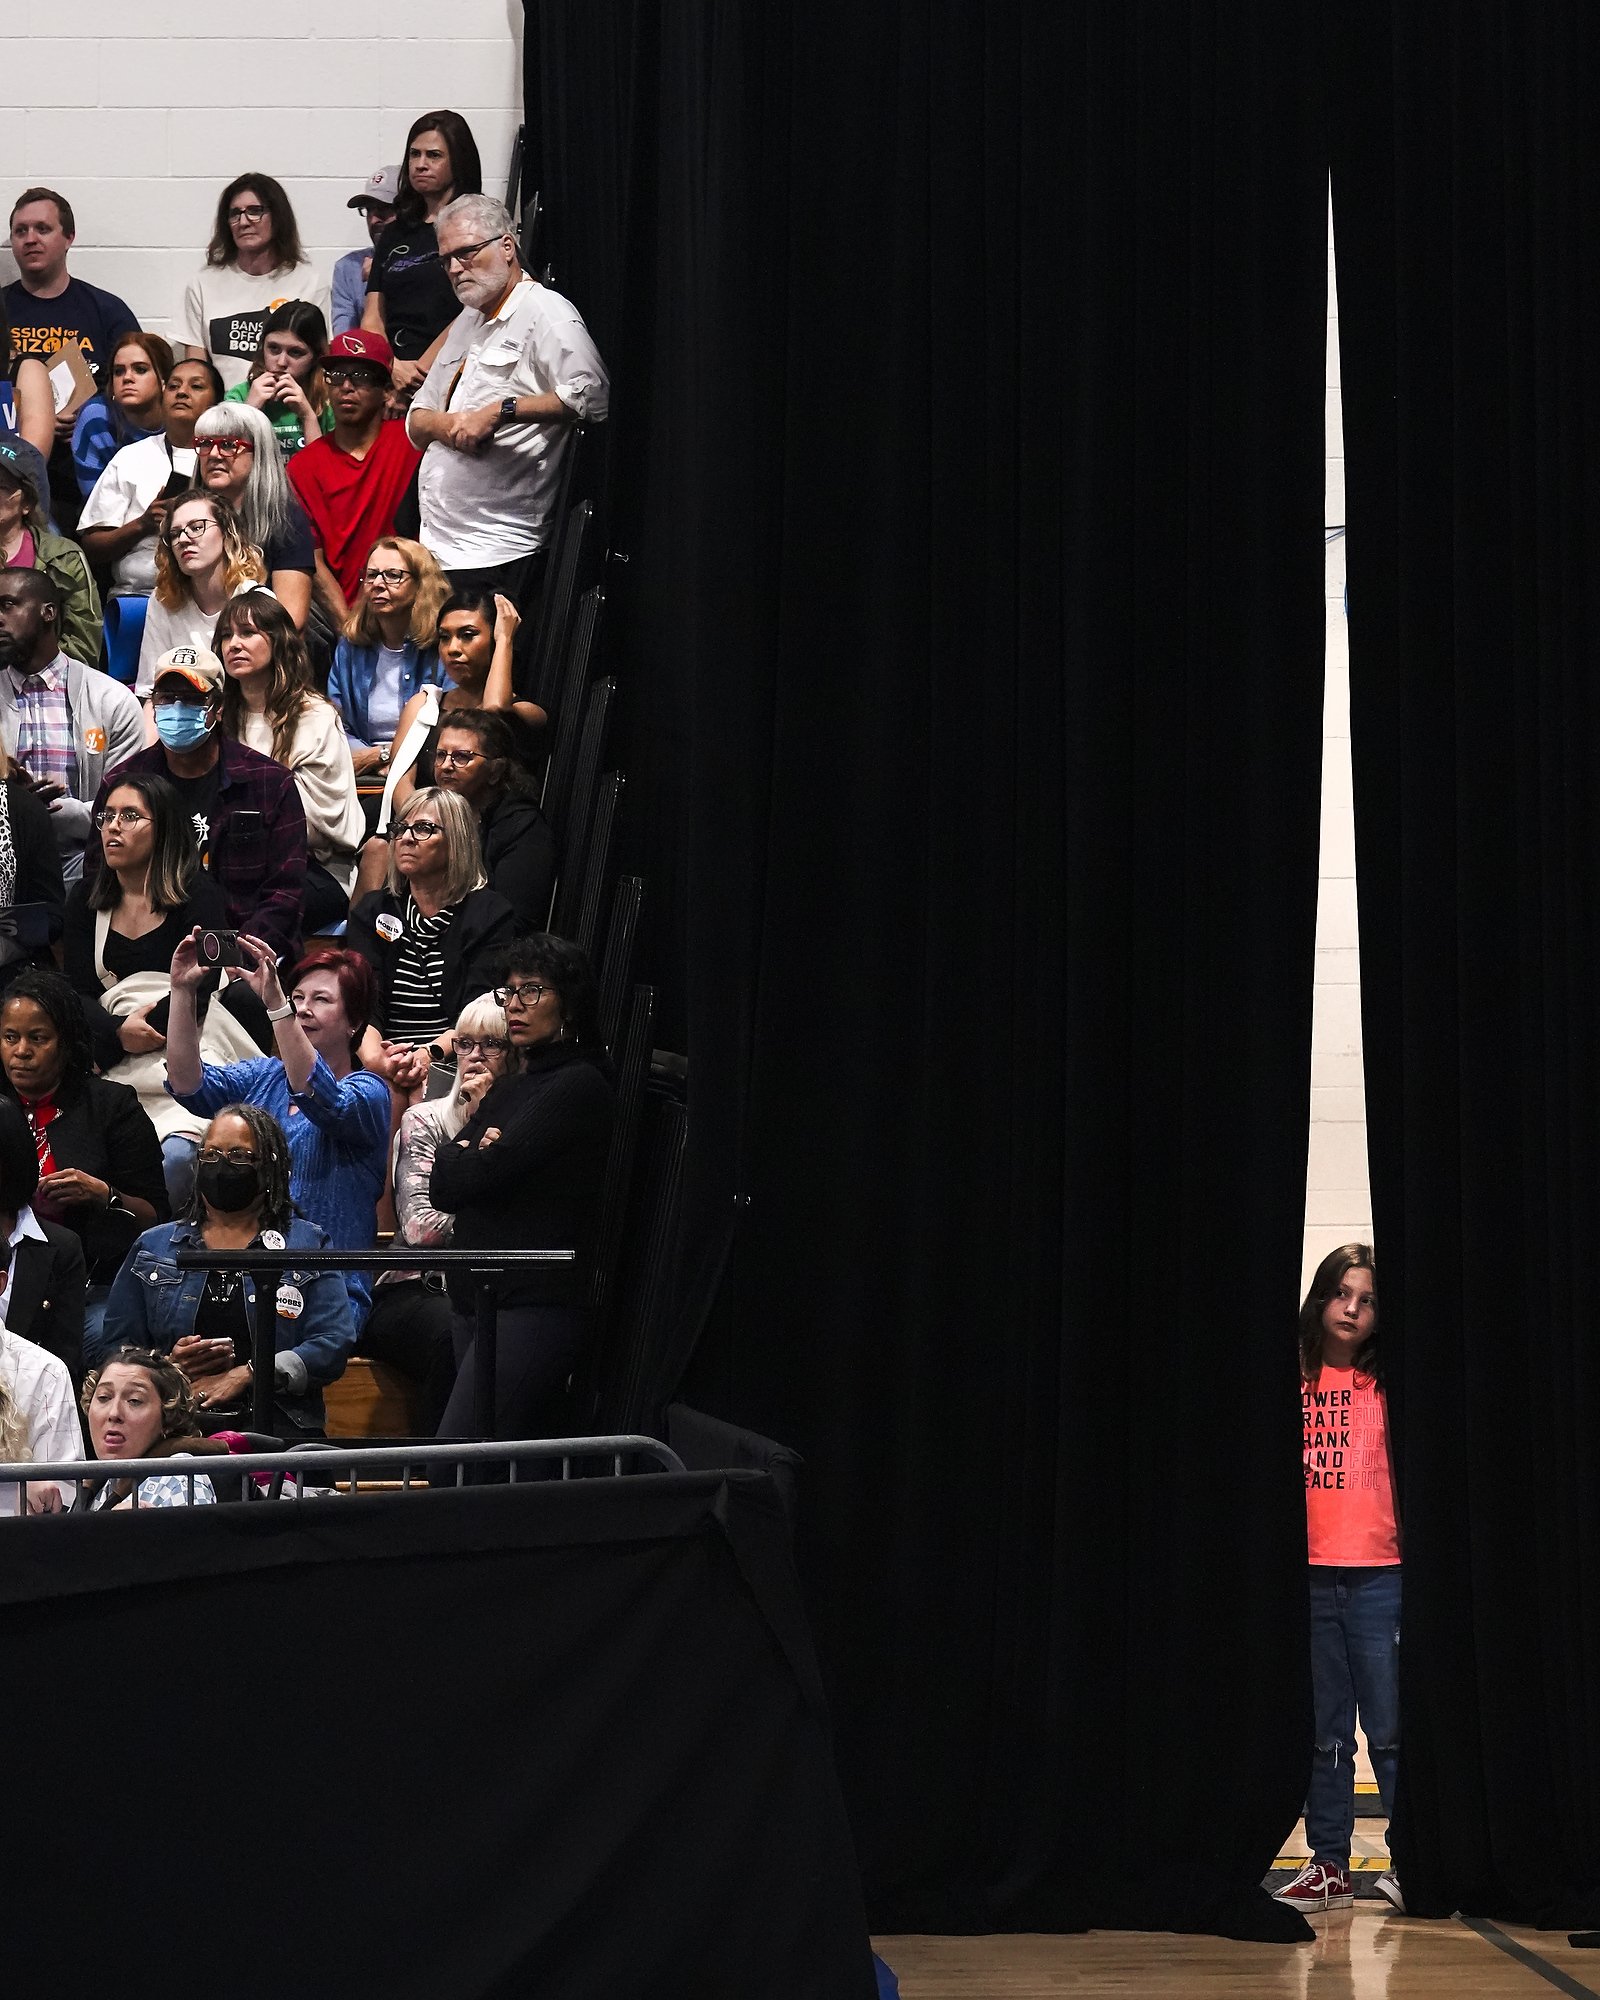  Hattie Mayes, at right, watches as her mother Kris Mayes, candidate for Arizona attorney general, speaks during a rally at Cesar Chavez High School on Wednesday, Nov. 2, 2022, in Phoenix. Former President Barack Obama highlighted the rally which was